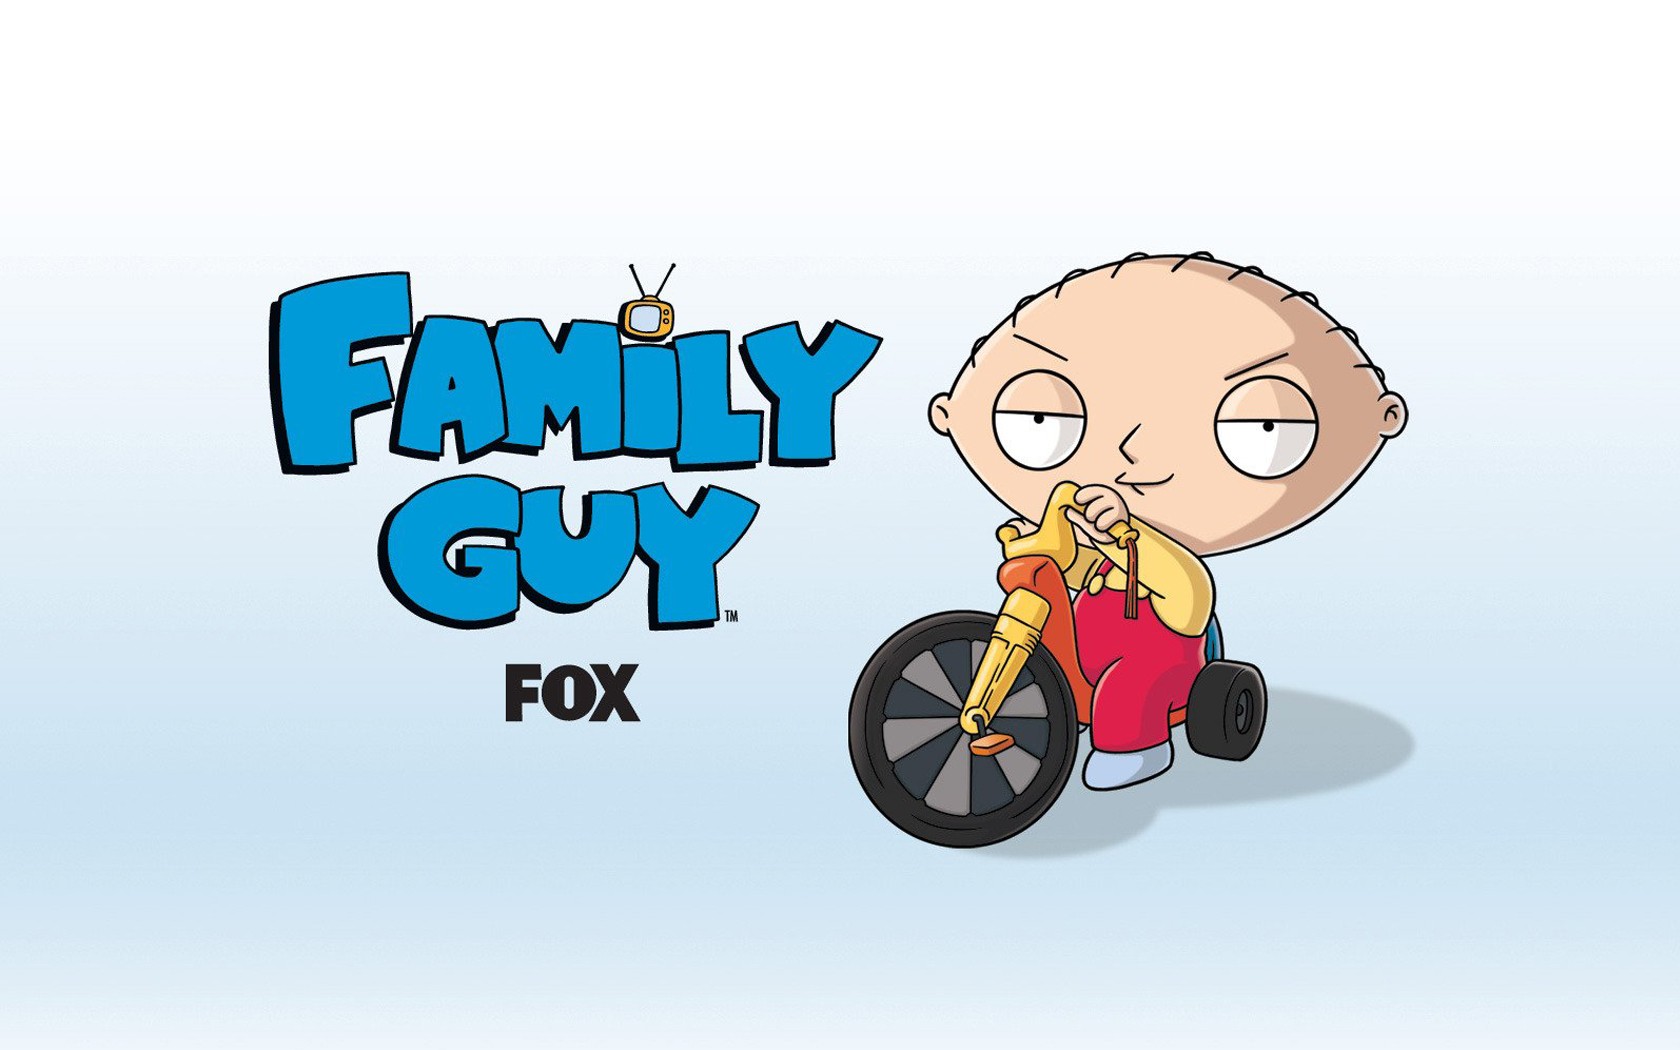 General 1680x1050 Family Guy Stewie Griffin cartoon simple background TV series